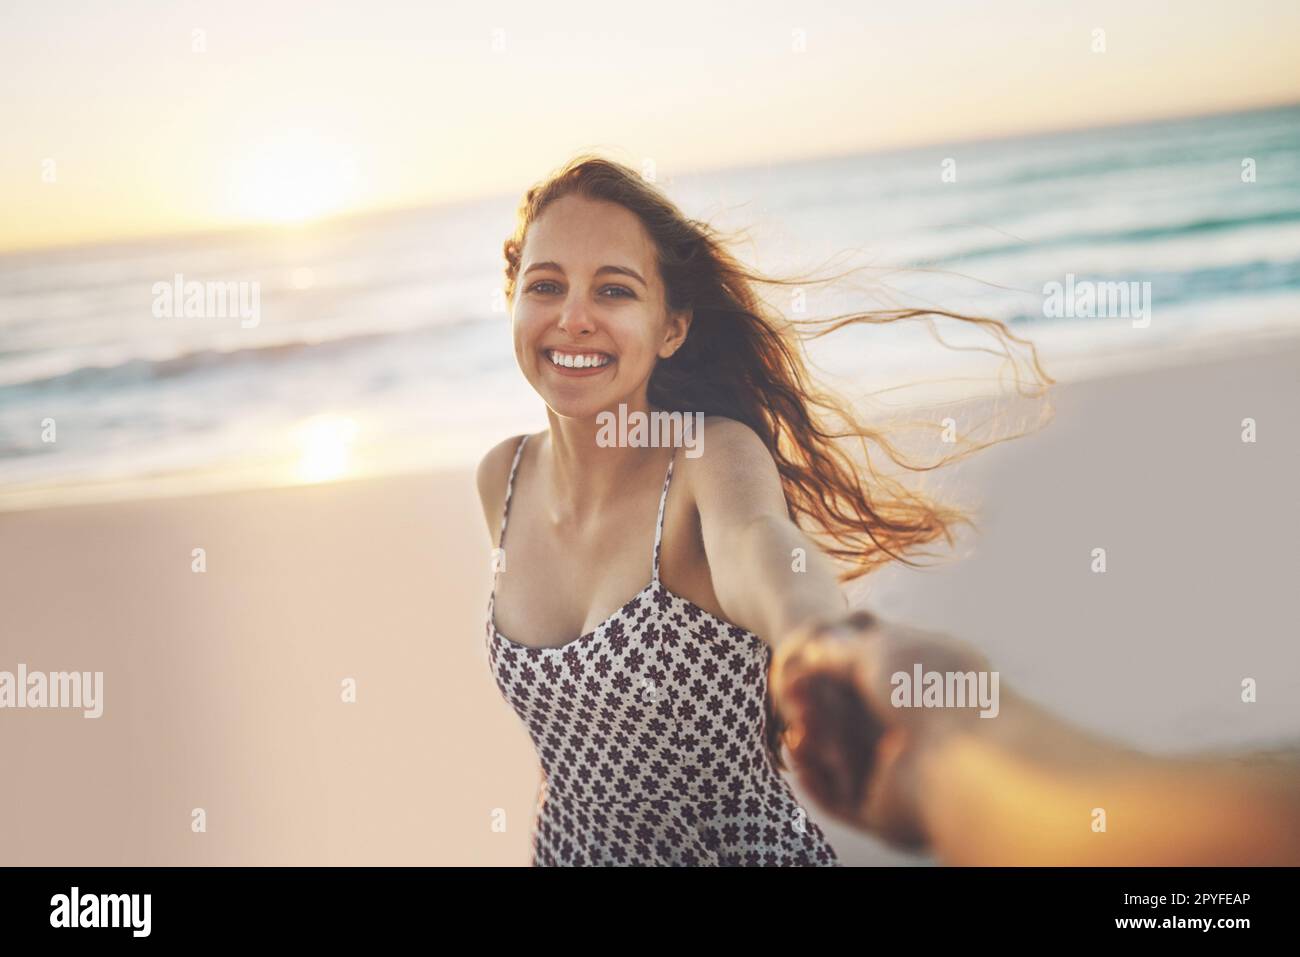 Paradise is never too far away. a young woman pulling someones hand at the beach. Stock Photo